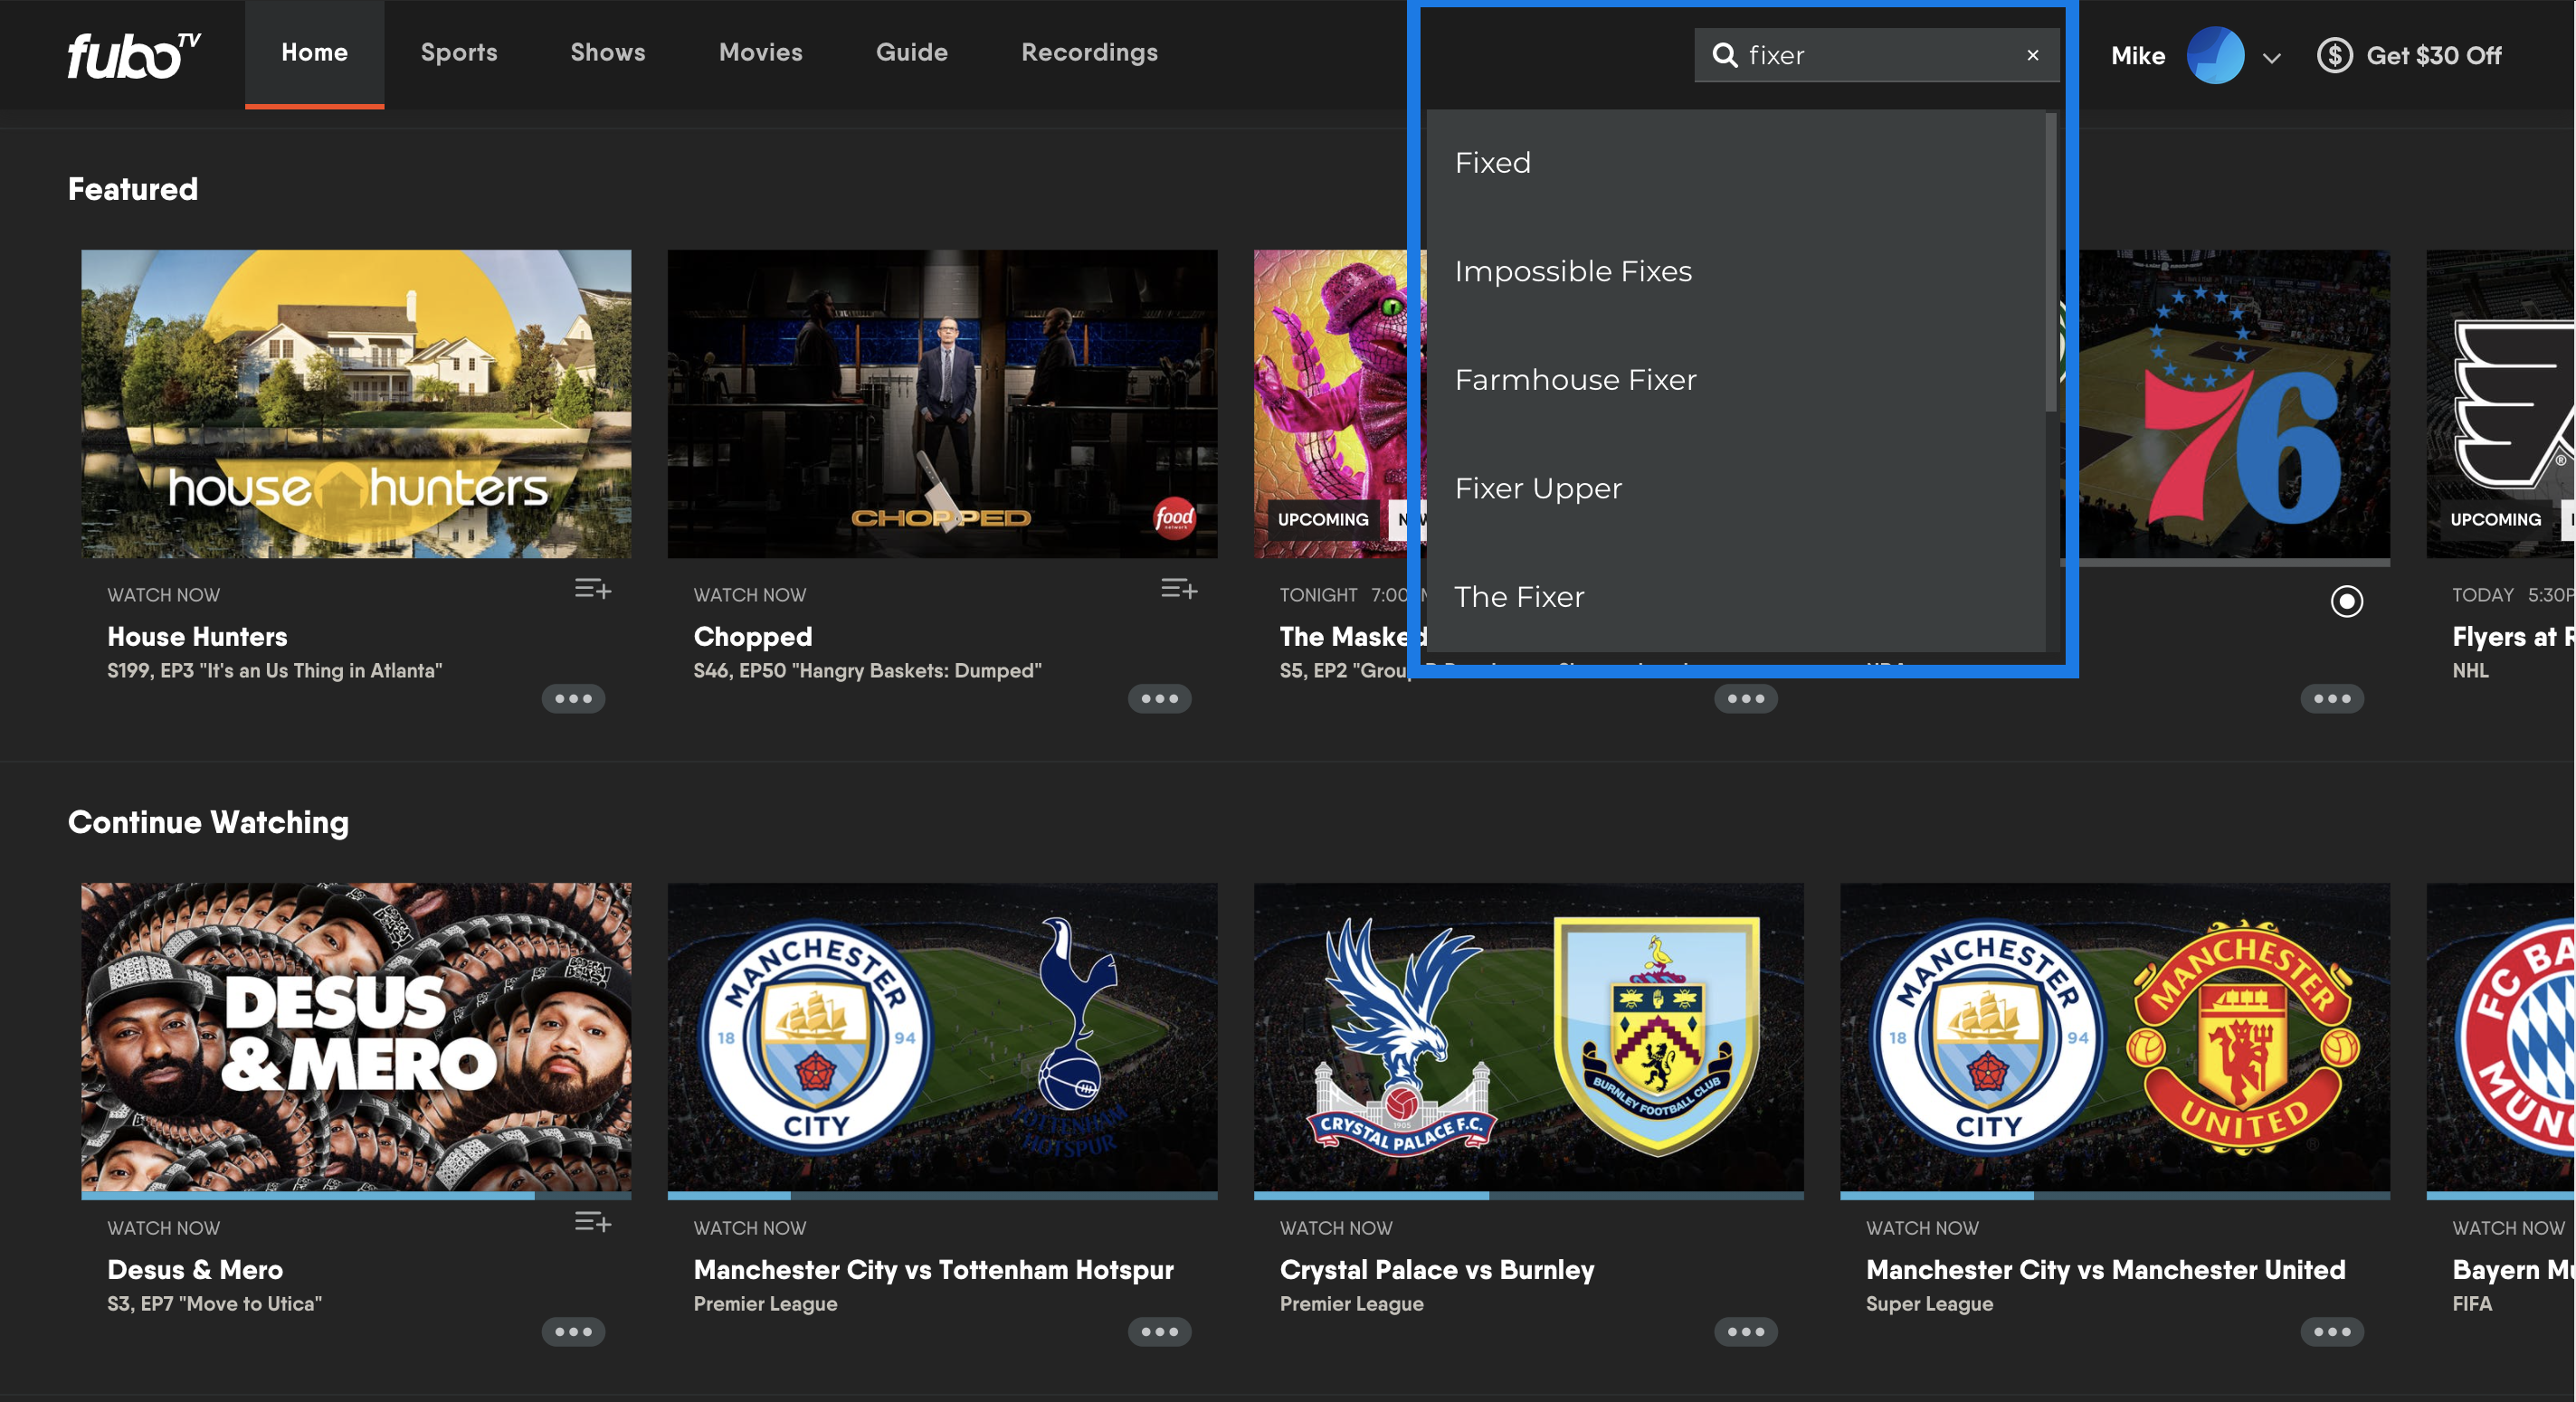 Home screen of the FuboTV app on web browser with search box selected at the top of the screen